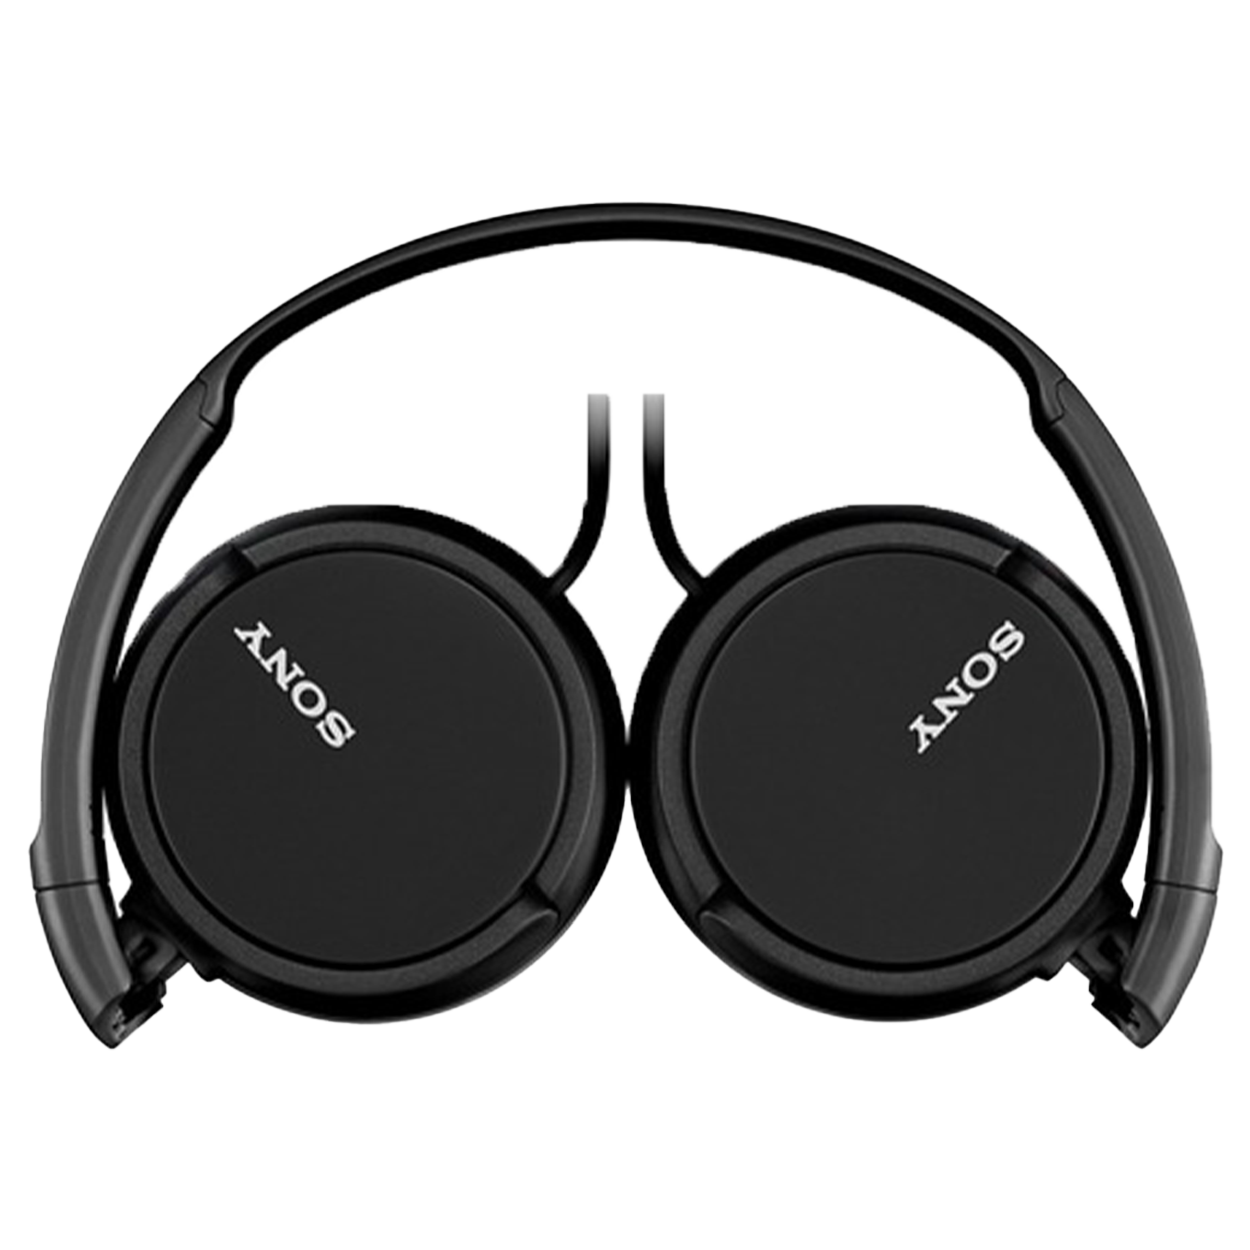  Sony WH-1000XM4 Wireless Noise Canceling Over-Ear Headphones  (Silver) Bundle with 10000 mAh Ultra-Portable LED Display Wireless Quick  Charge Battery Bank (Black) (2 Items) : Electronics